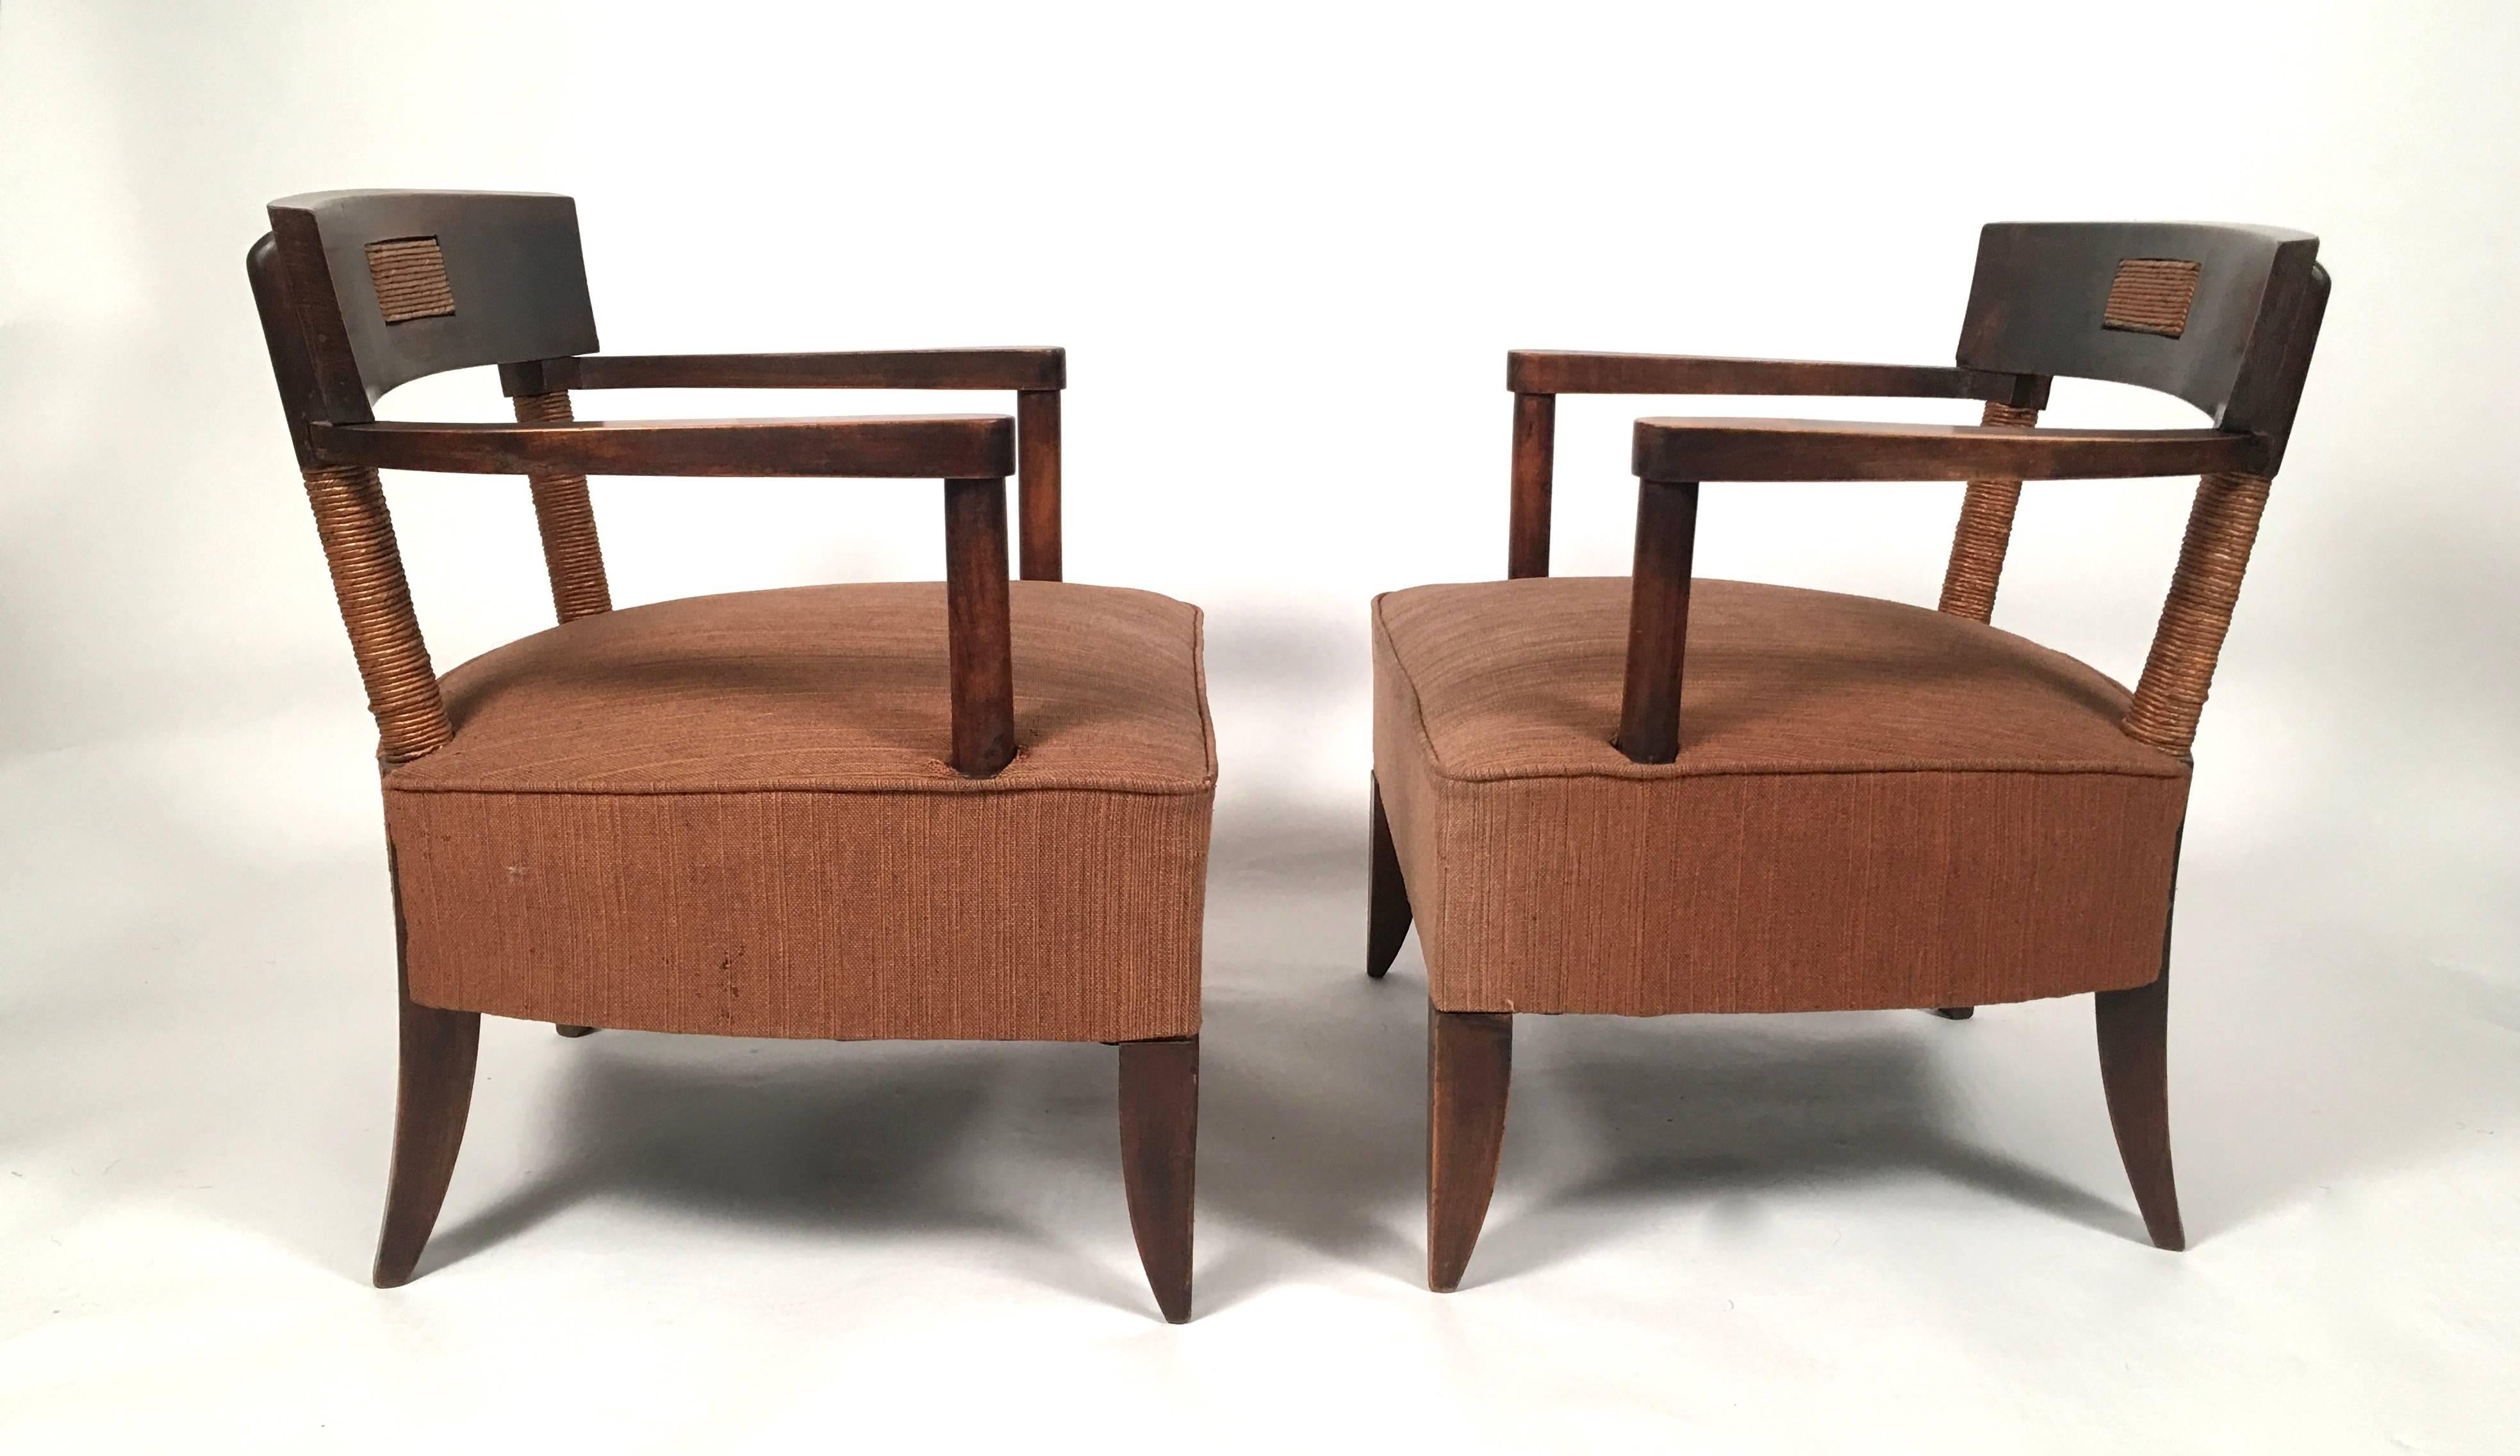 Carved Pair of French Art Deco African Inspired Oak and Paper Cord Armchairs